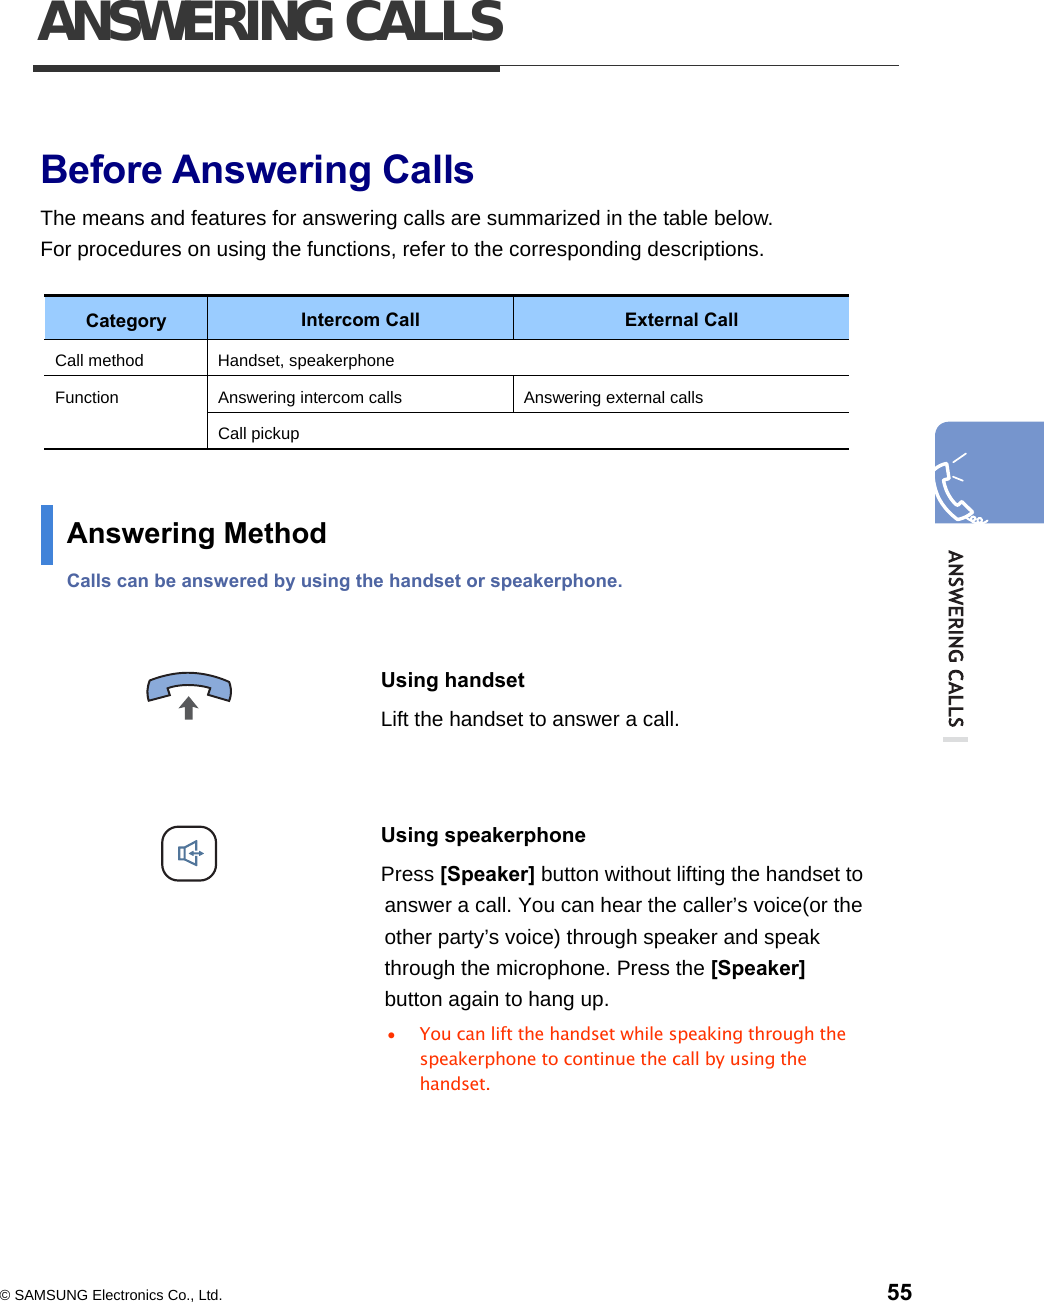  © SAMSUNG Electronics Co., Ltd.    55 ANSWERING CALLS  Before Answering Calls The means and features for answering calls are summarized in the table below.   For procedures on using the functions, refer to the corresponding descriptions.  Category   Intercom Call  External Call Call method  Handset, speakerphone Answering intercom calls  Answering external calls Function Call pickup  Answering Method Calls can be answered by using the handset or speakerphone.     Using handset   Lift the handset to answer a call.   Using speakerphone Press [Speaker] button without lifting the handset to answer a call. You can hear the caller’s voice(or the other party’s voice) through speaker and speak through the microphone. Press the [Speaker] button again to hang up.   •  You can lift the handset while speaking through the speakerphone to continue the call by using the handset.  